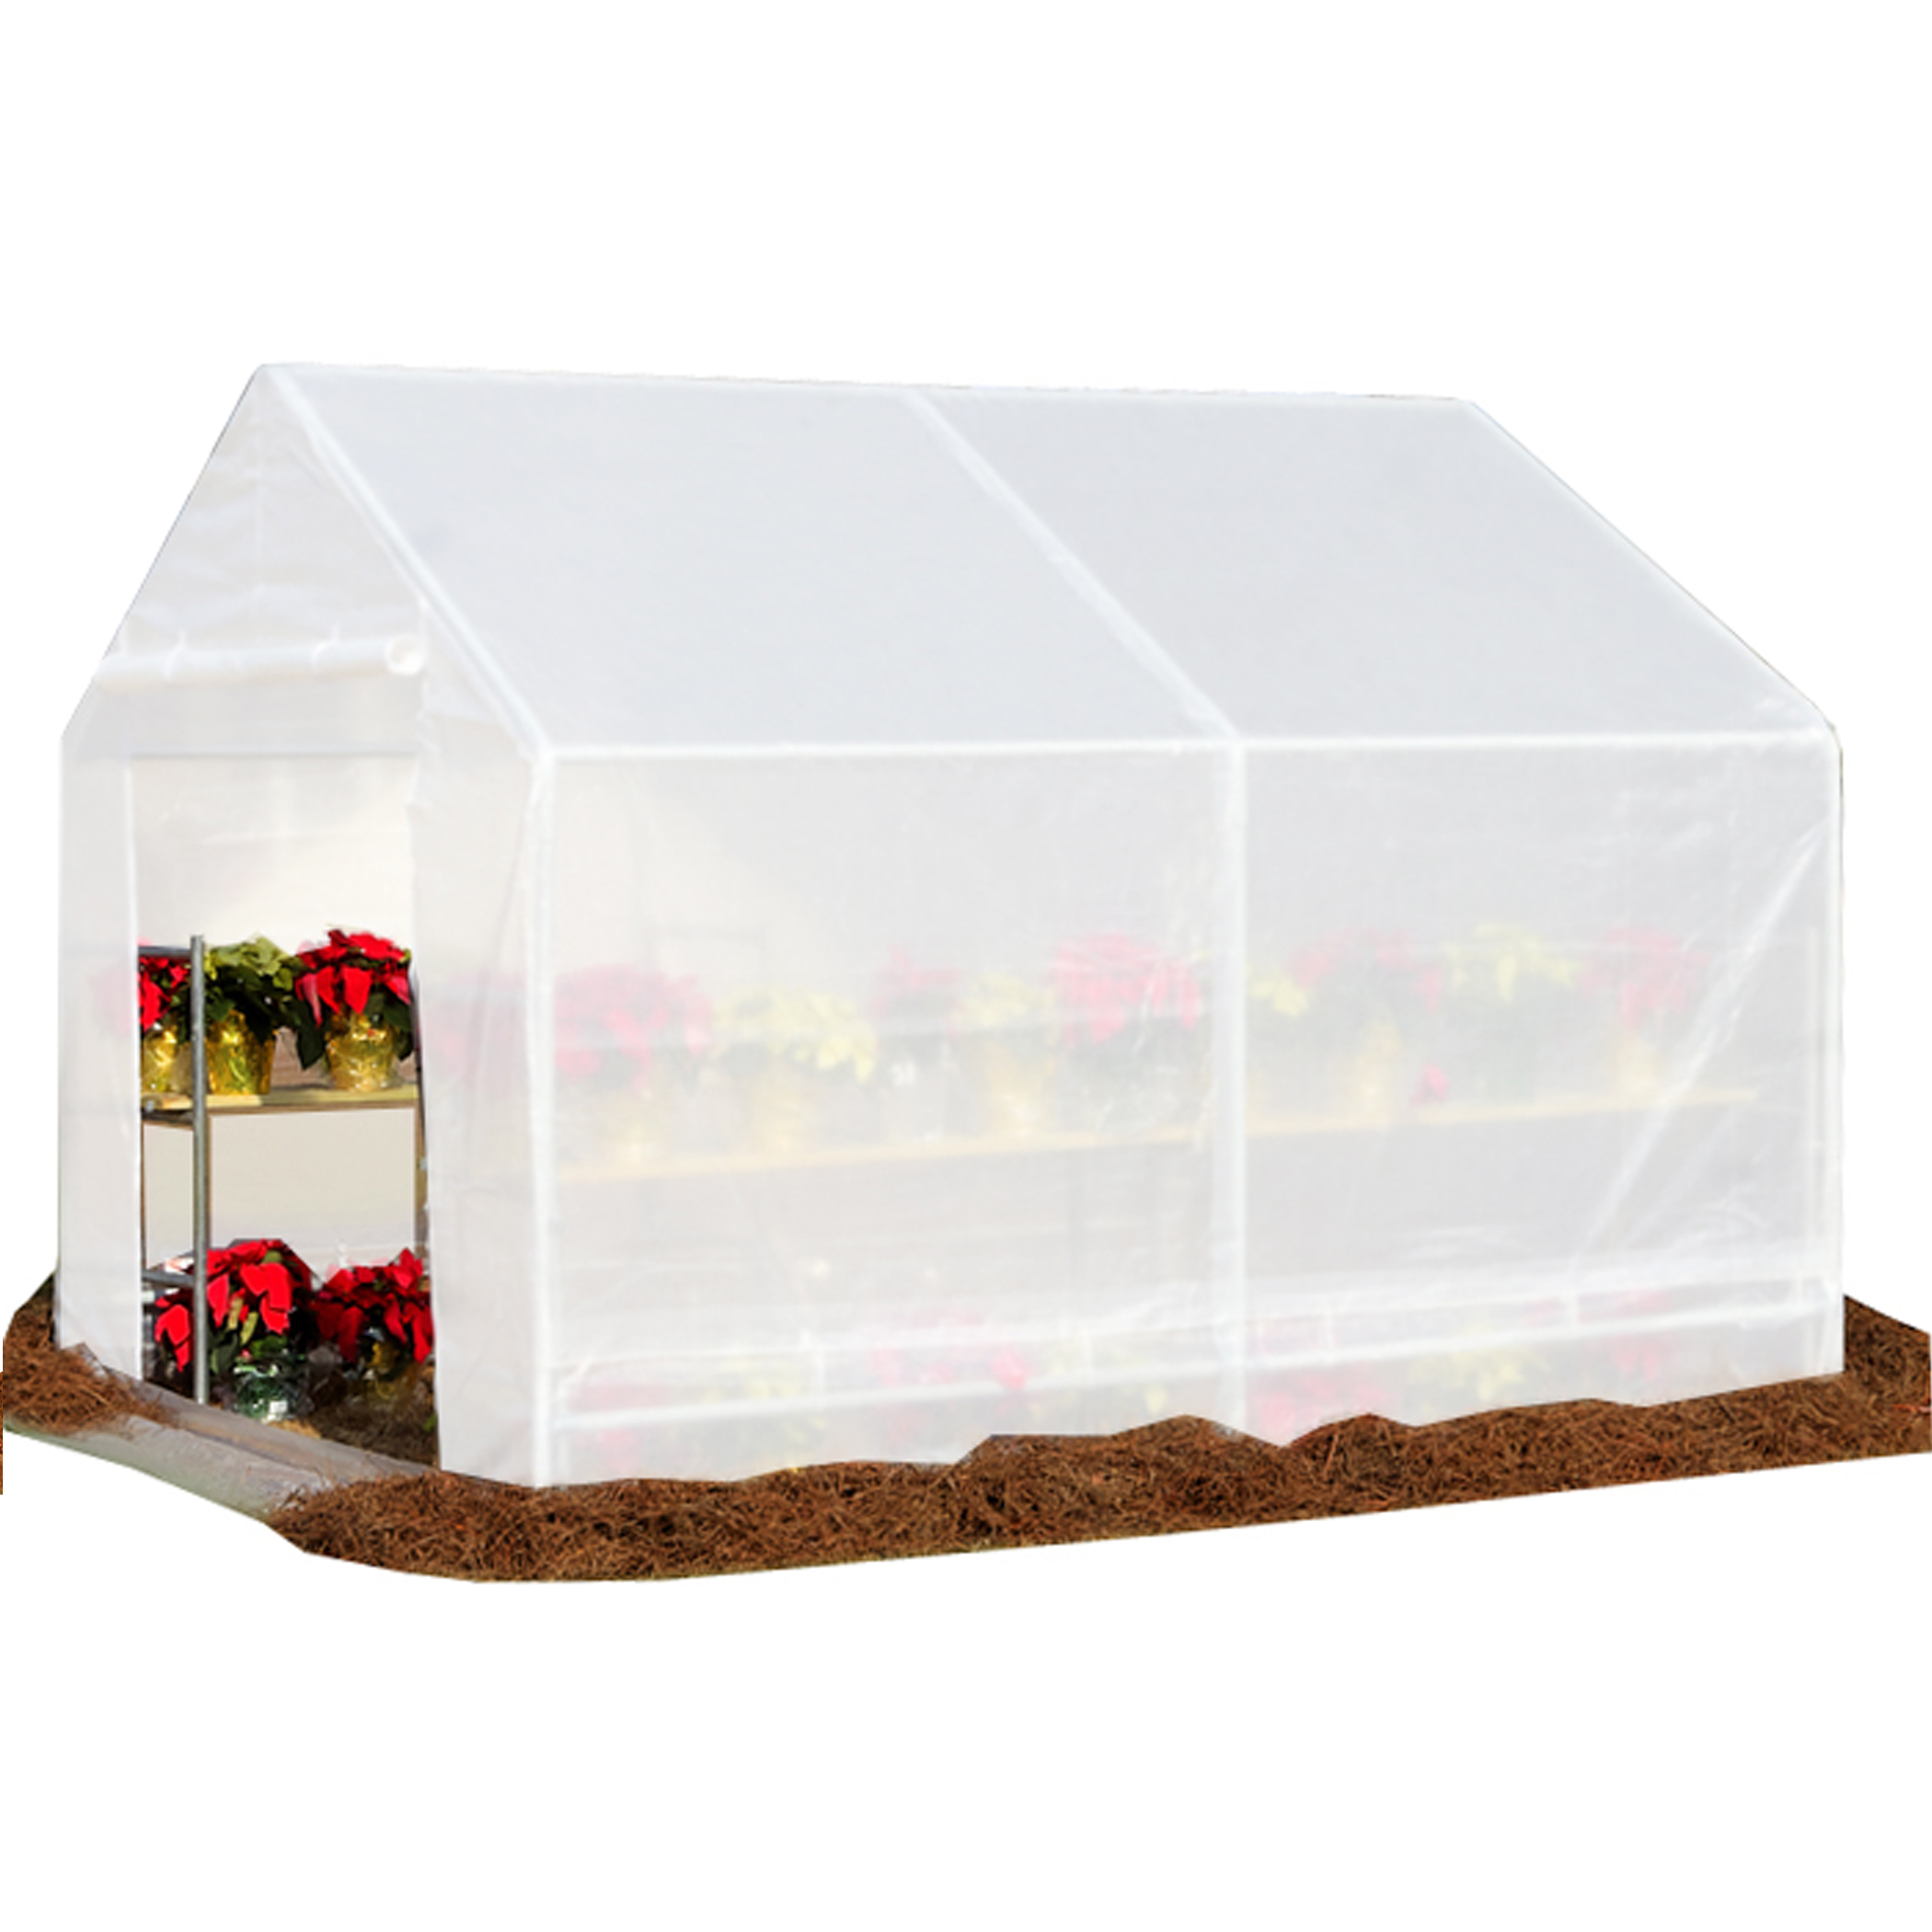 King Canopy Greenhouse 10' x 10' , 1 3/8 in. Steel Frame, 6-LEG, Opaque - image 1 of 7